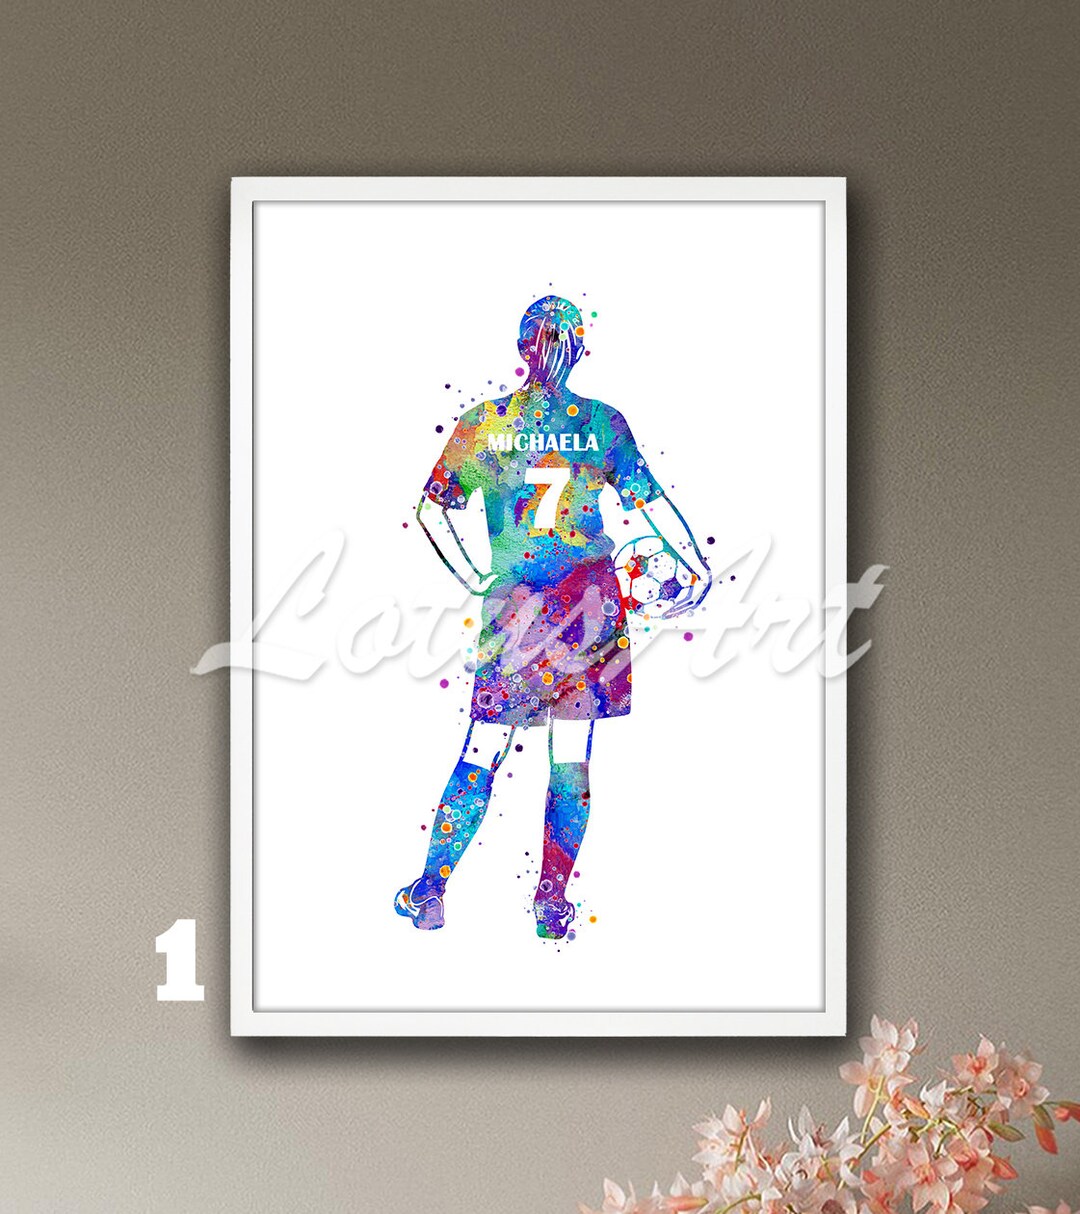 Personalized Girl Soccer Wall Art Player Football Watercolor Print